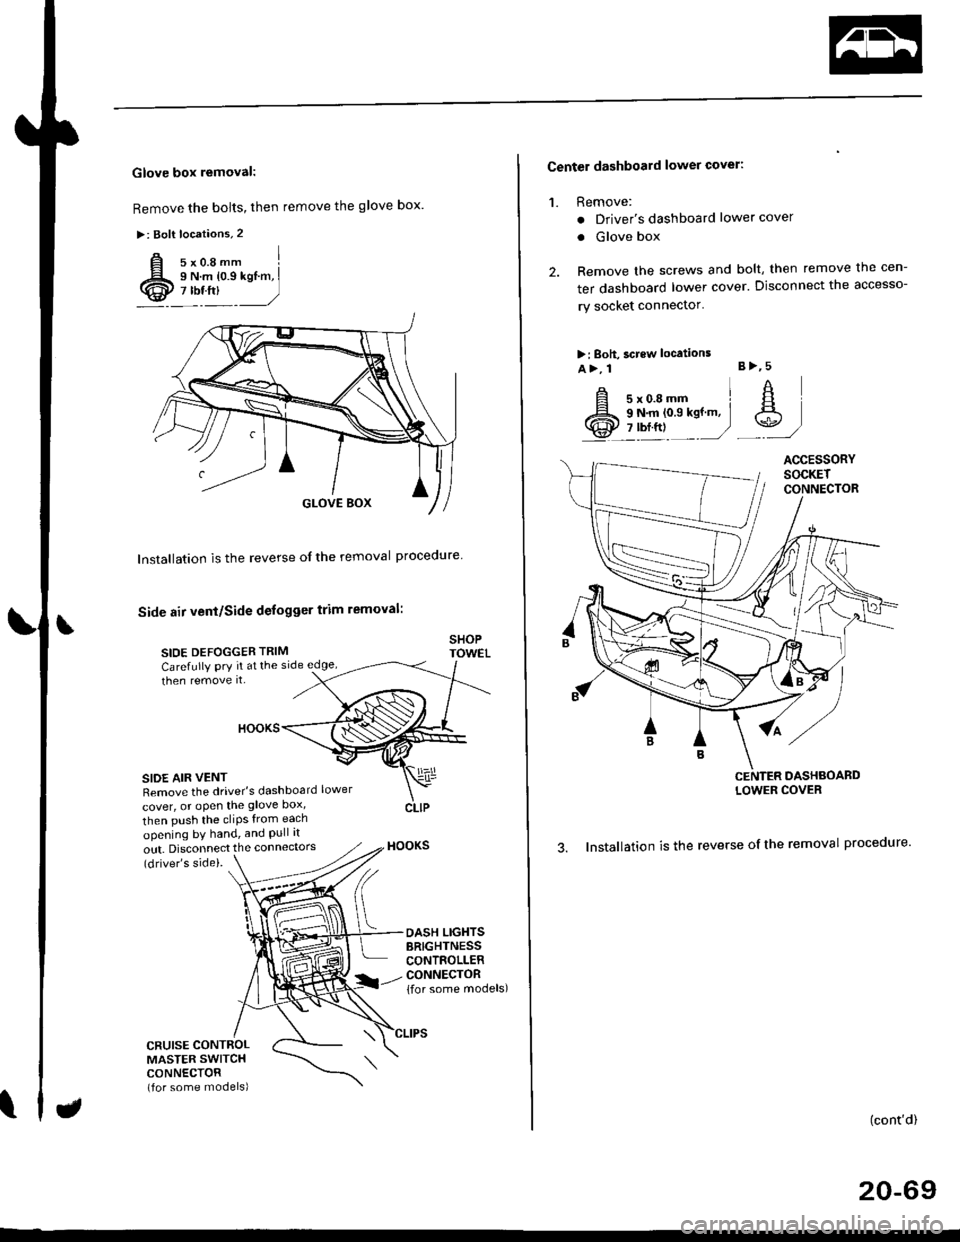 HONDA CIVIC 1998 6.G Workshop Manual Glove box removal:
Remove the bolts, then remove the glove box.
>: Bolt locations,2
Installation is the reverse of the removal proceoure
Side air vent/Side defogger trim removal:
SIOE DEFOGGER TRIMSHO